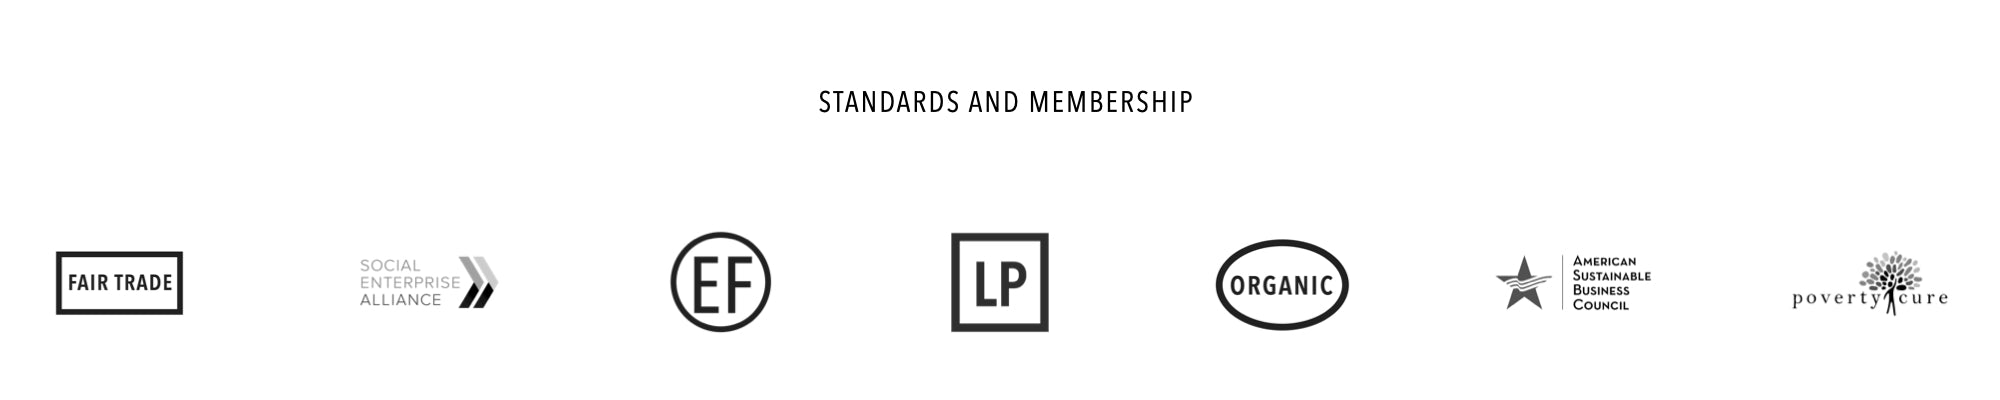 List of MADE FREE corporate standards and membership